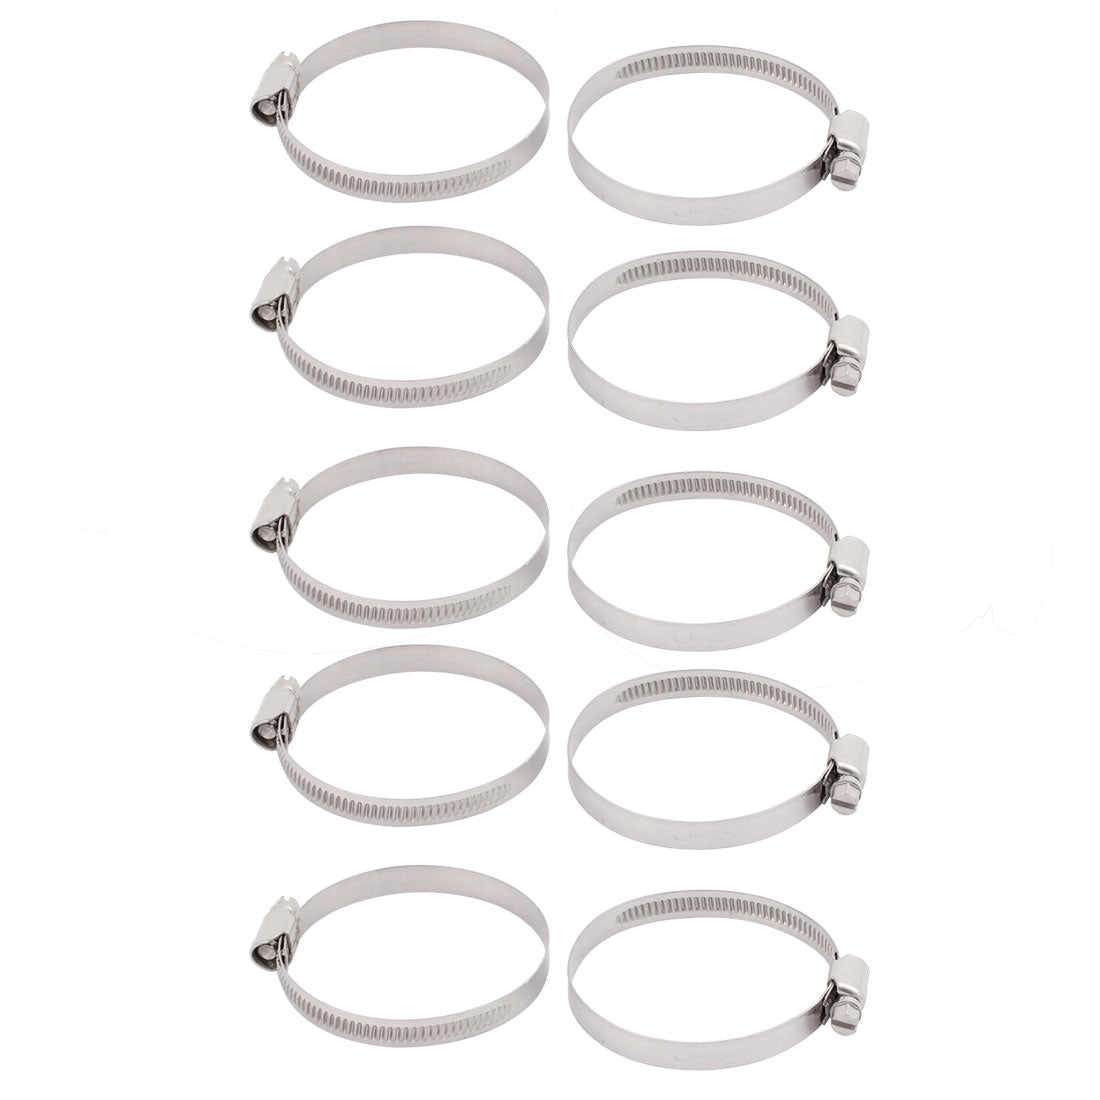 uxcell Uxcell 10pcs 50-70mm Clamping Range 8mm Width Steel Hose Clamp